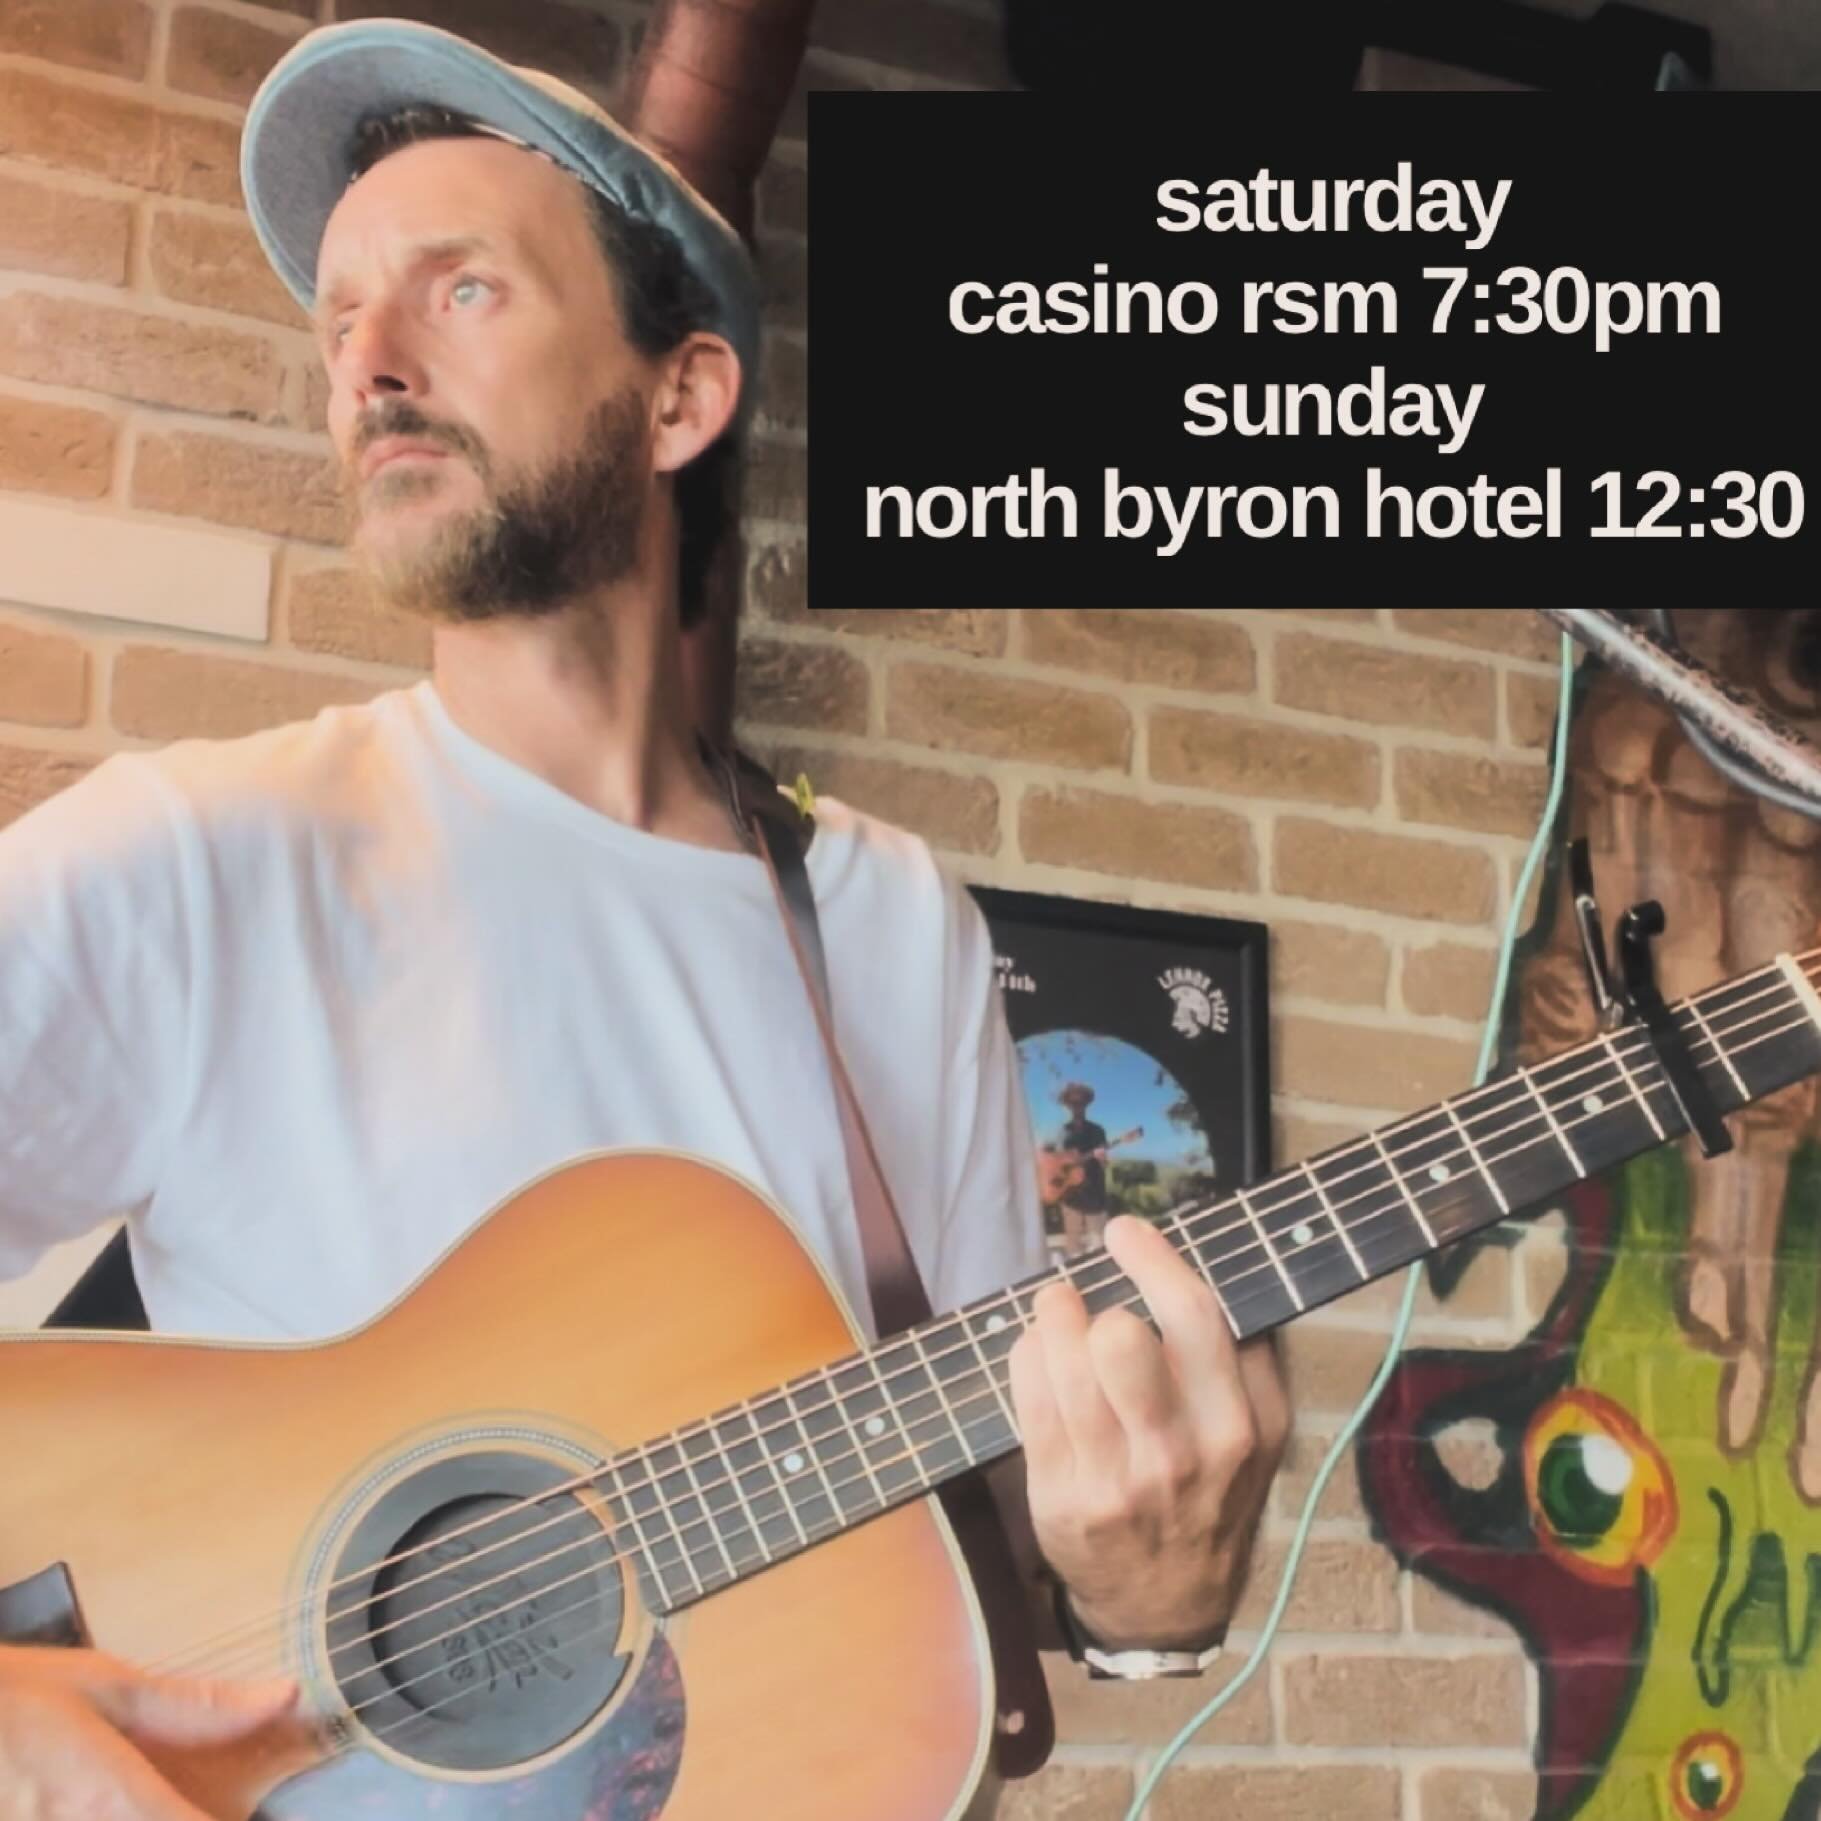 Looking forward to performing at these two awesome venues on the weekend 🎼✨

Saturday
@casinorsm from 7:30pm 🍻

Sunday 
@northbyronhotel from 12:30pm ☀️

Unfortunately my appearance at the #Lismore outdoor Cinema this Friday has been postponed due 